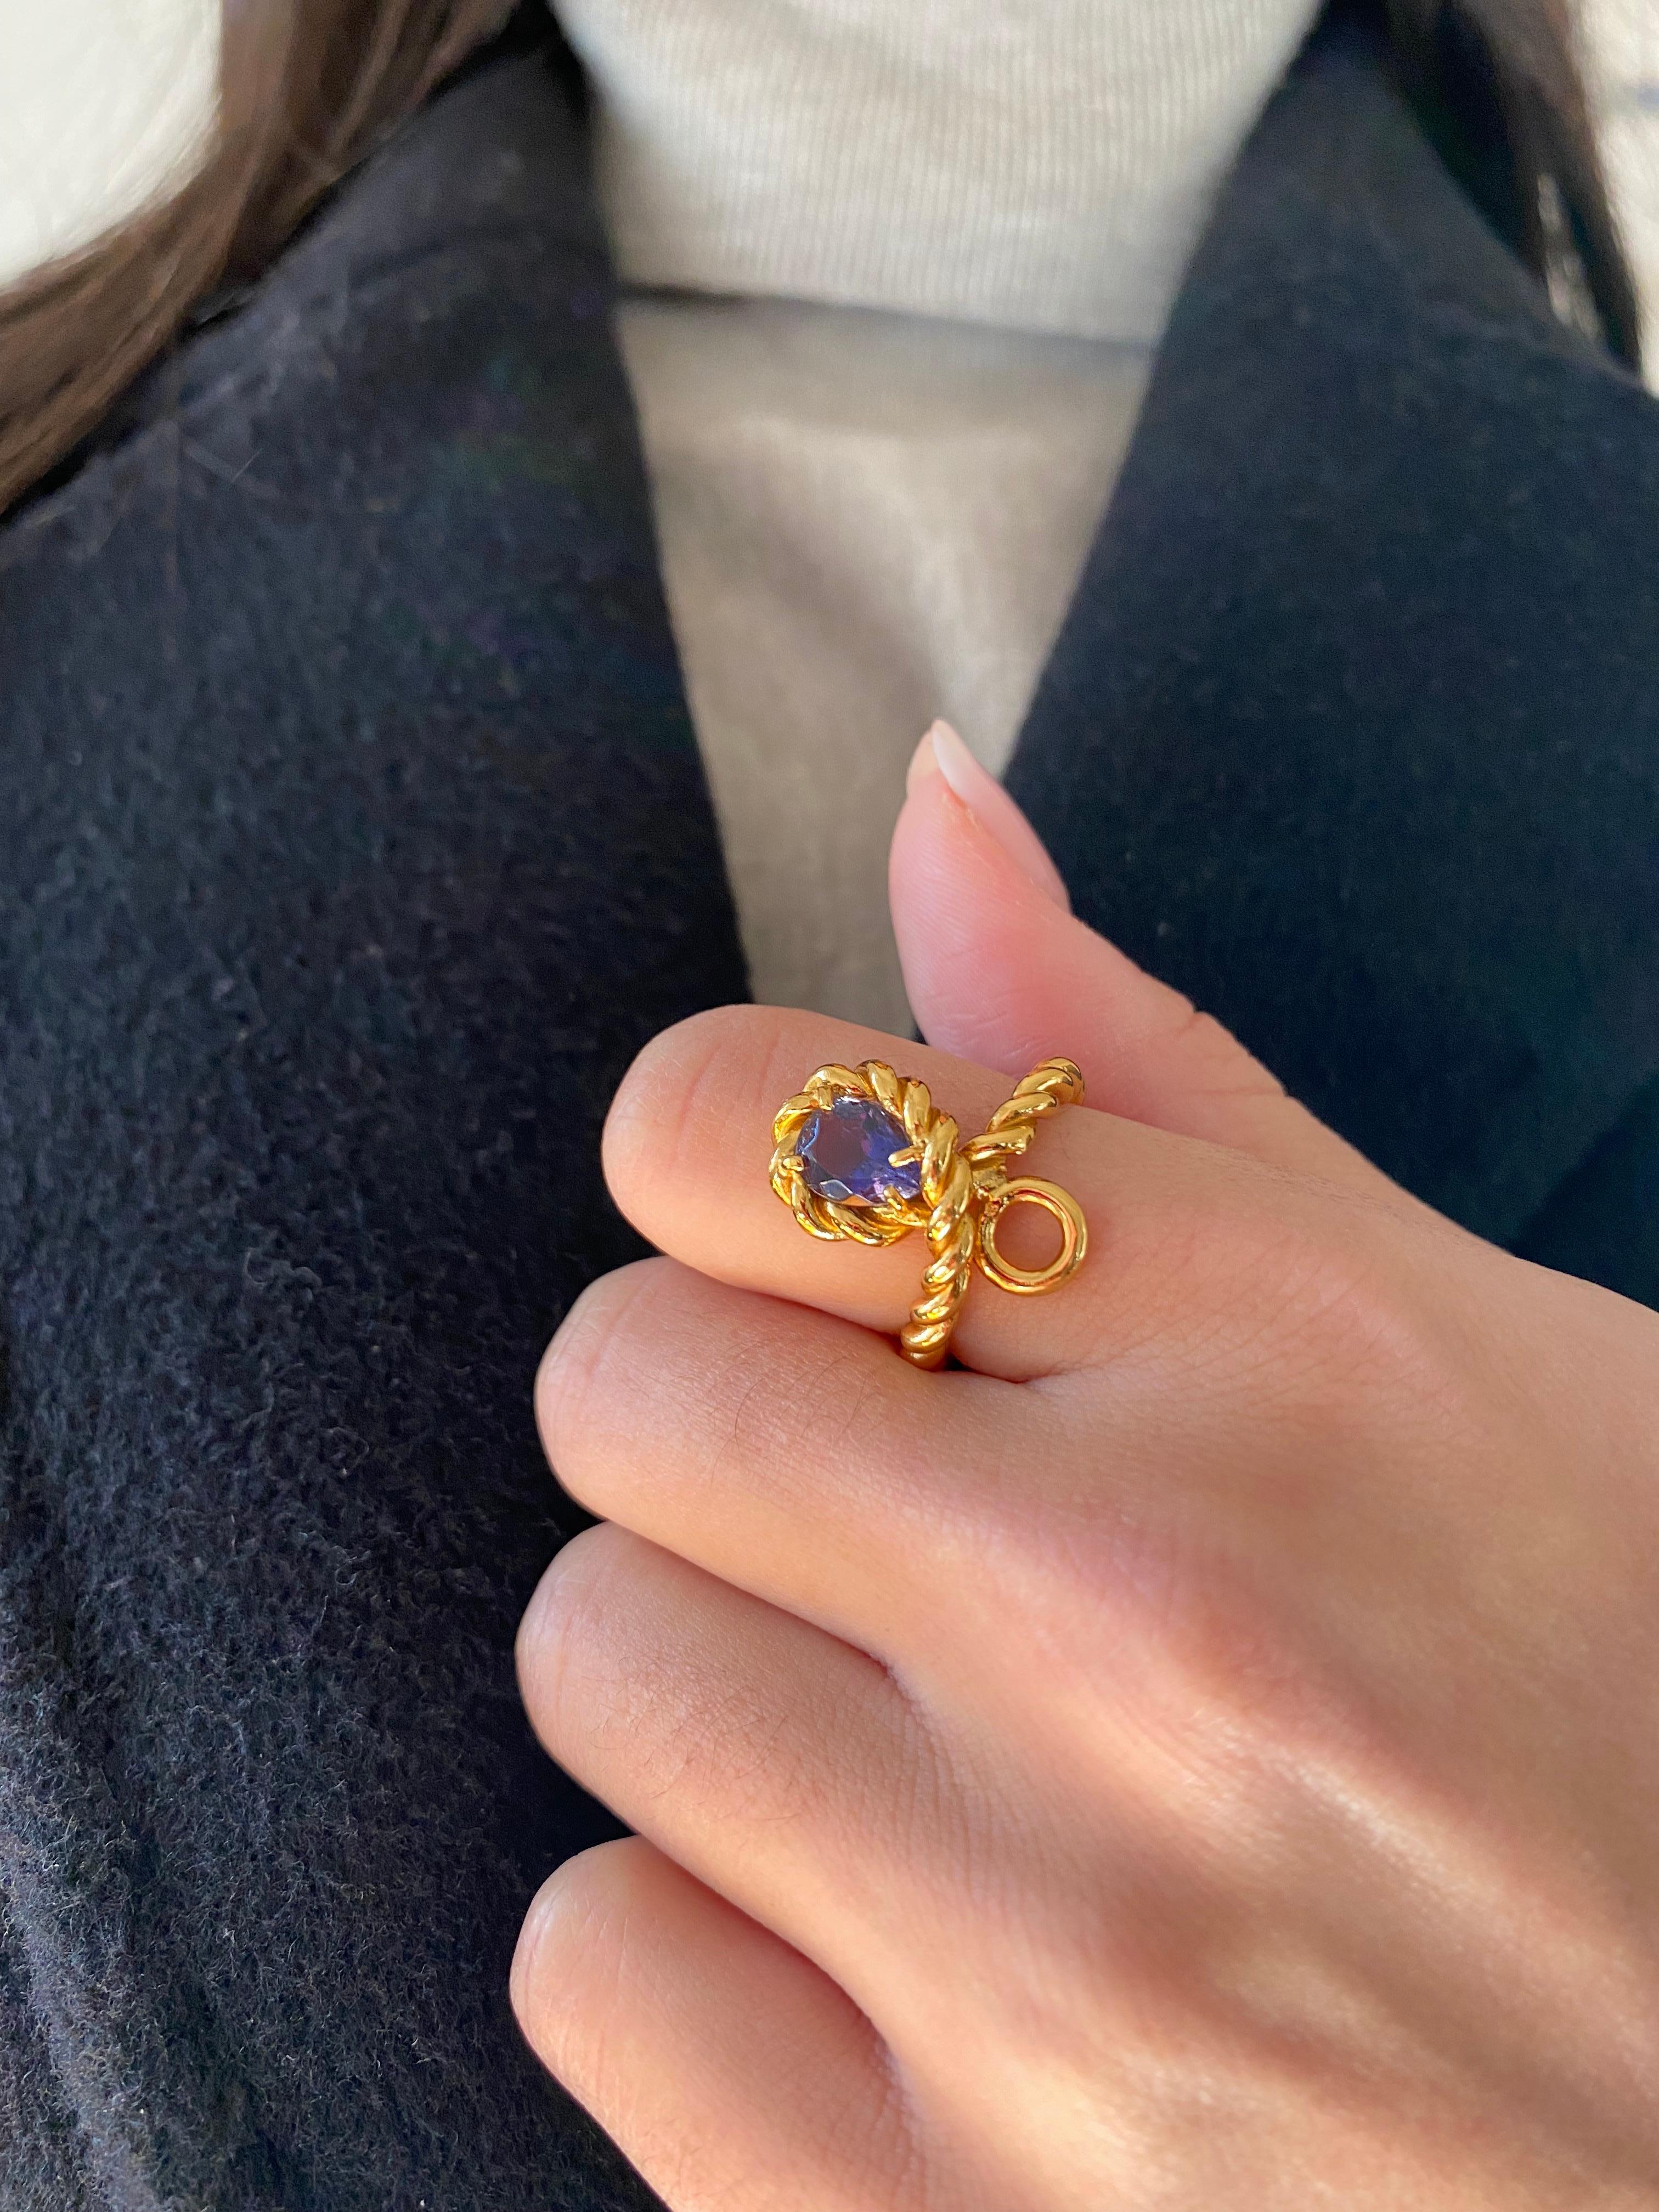 1.2 Carat Sapphire Twisted Rope 18 Karats Yellow Gold Design Modern Ring.
Rossella Ugolini Design Collection a beautiful pear cut Sapphire Design Ring handcrafted in a 18 Karats Yellow Gold twisted rope that makes a single line around the finger and